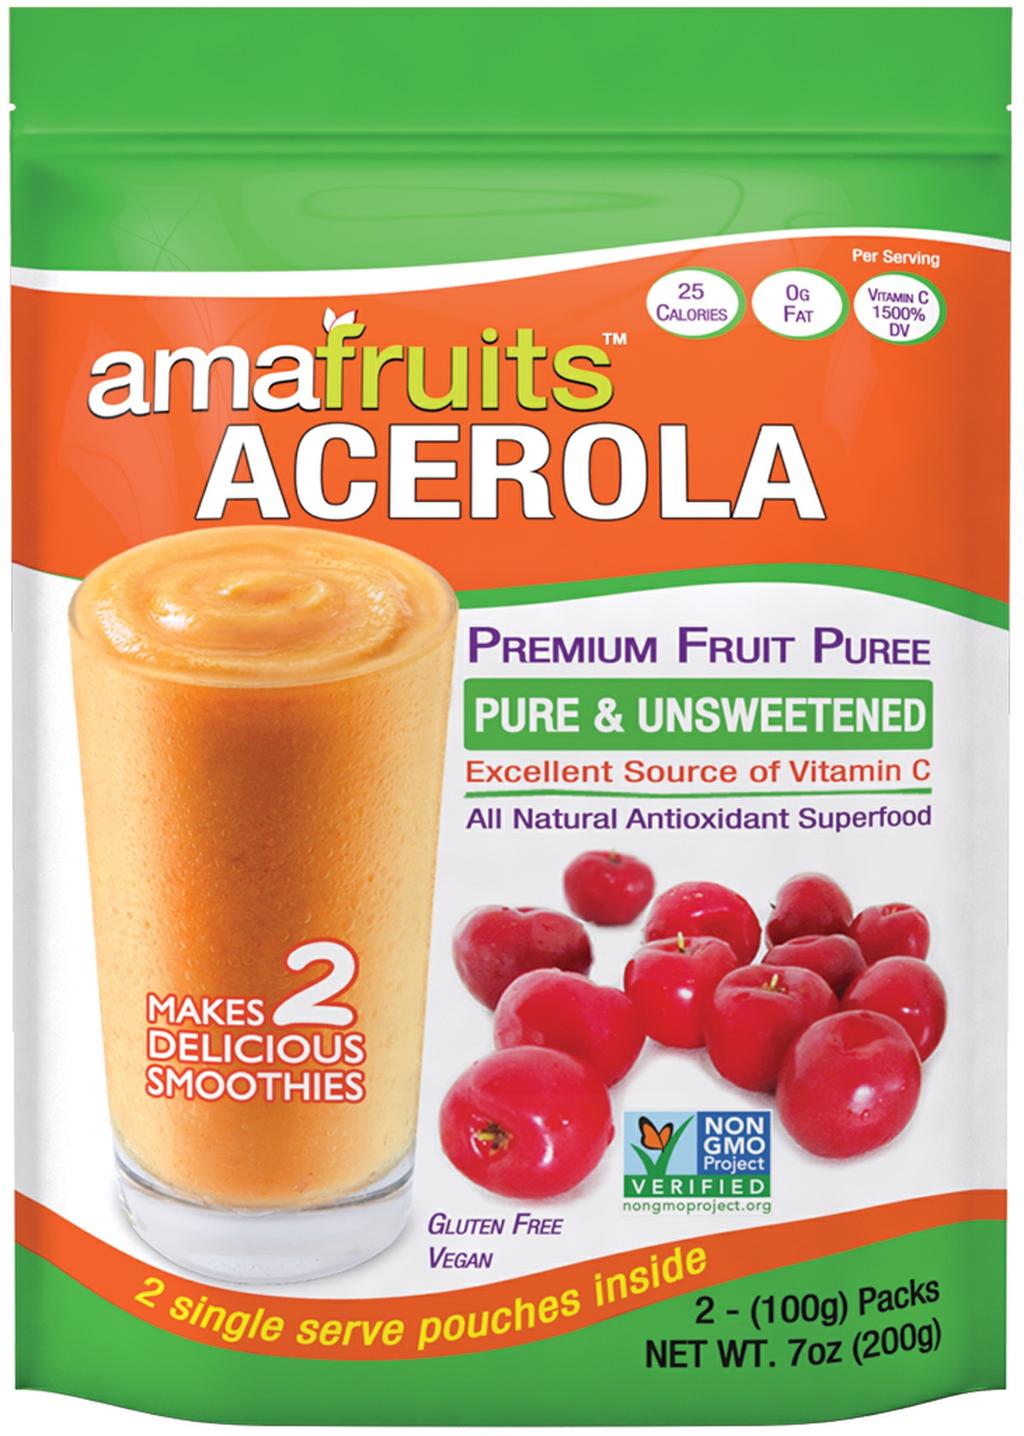 Vitamin C: About 4oz of acerola pure has the same amount of vitamin C as 470 oz of orange juice Vitamin A: A single acerola cherry can provide the same amount of Vitamin A as an entire carrot!